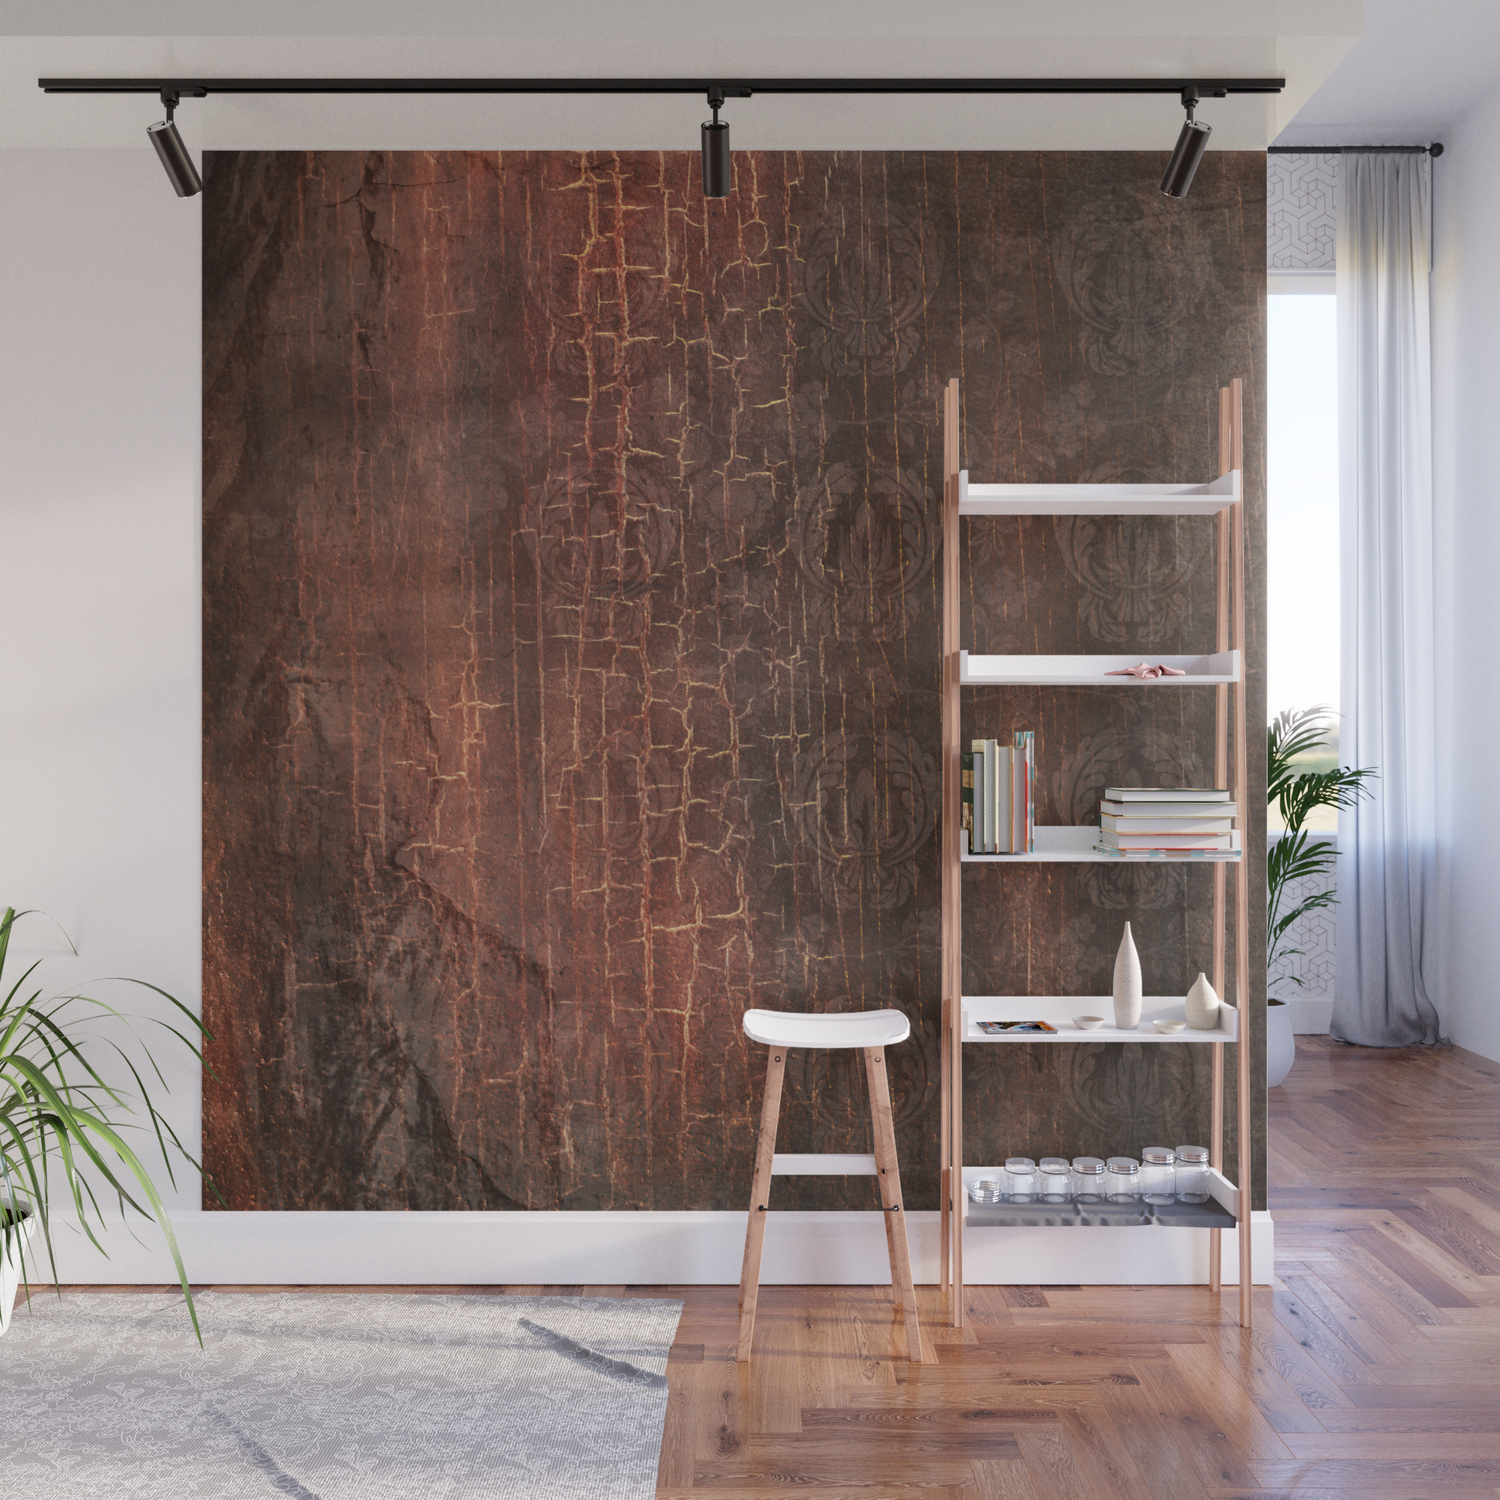 409 Aged Leather Wall Mural By Tinker, Leather Wall Hangings